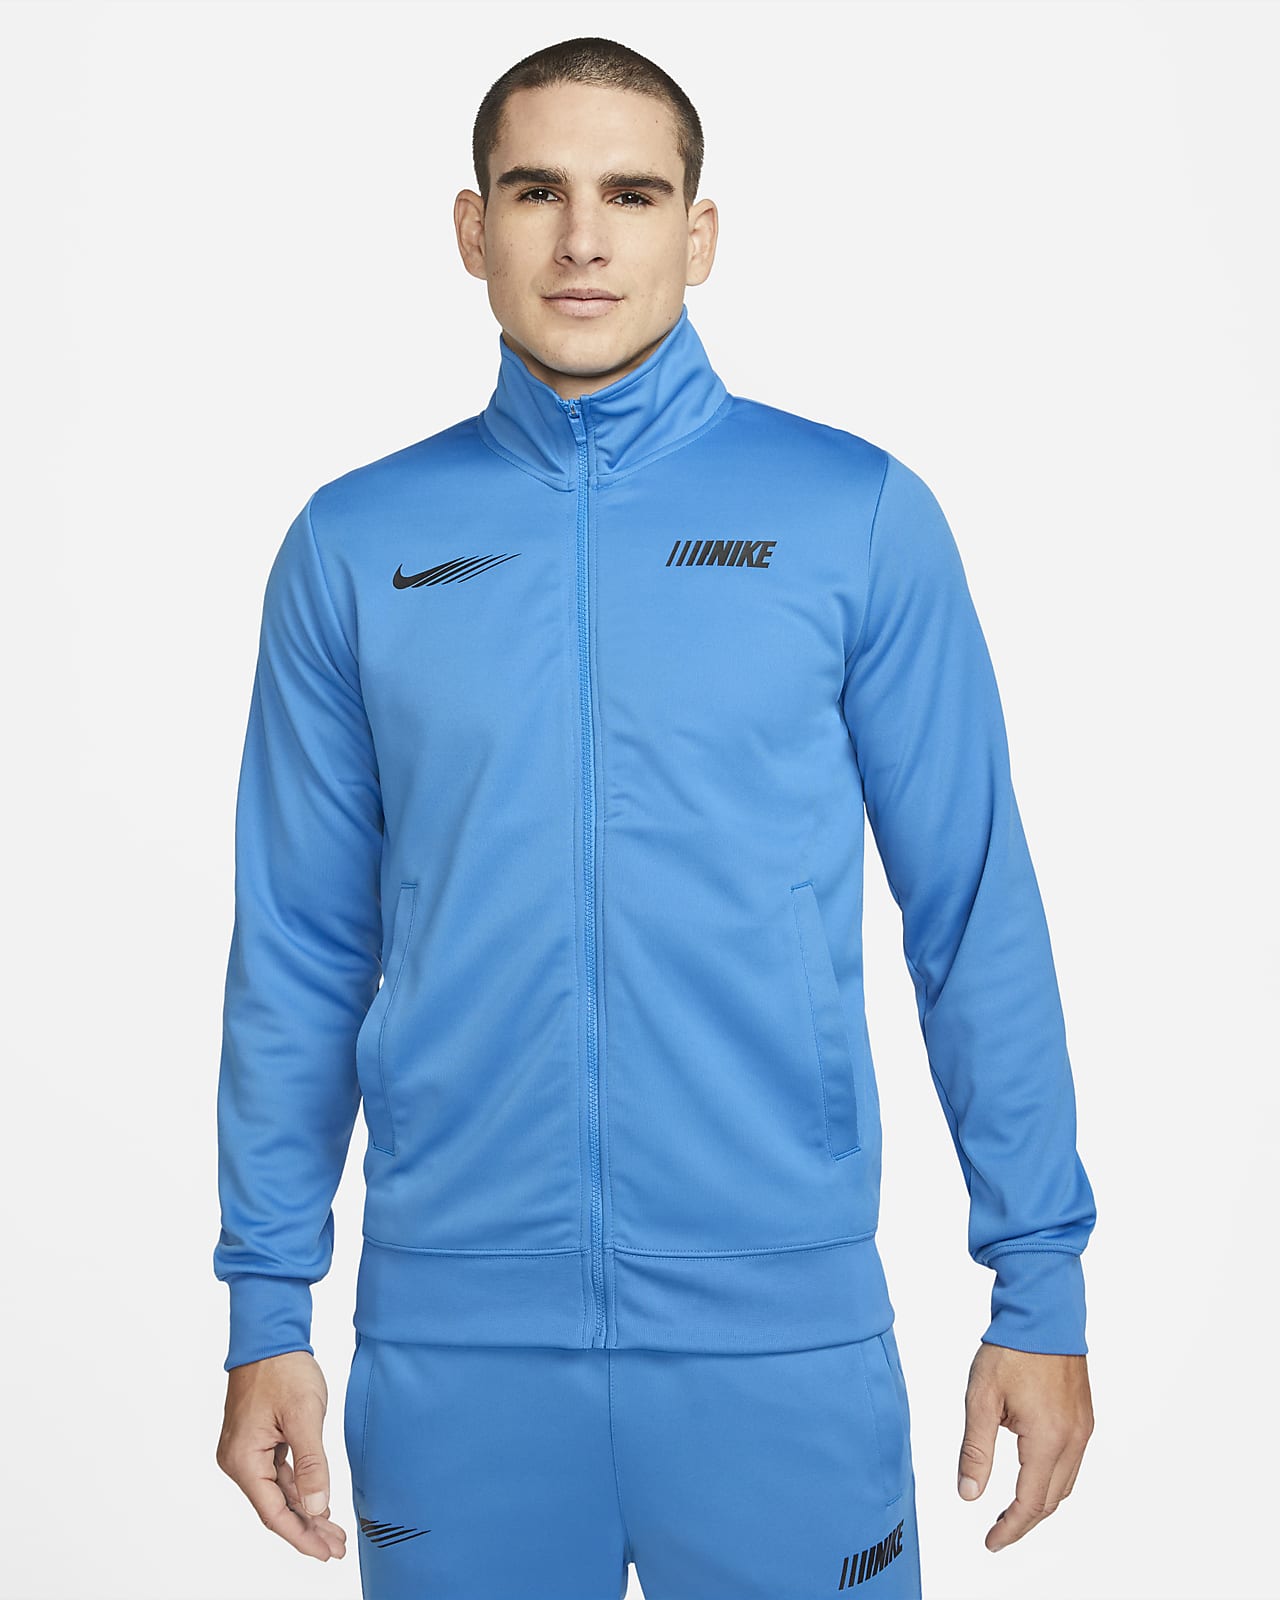 Official Tracksuits by adidas, Nike, Puma